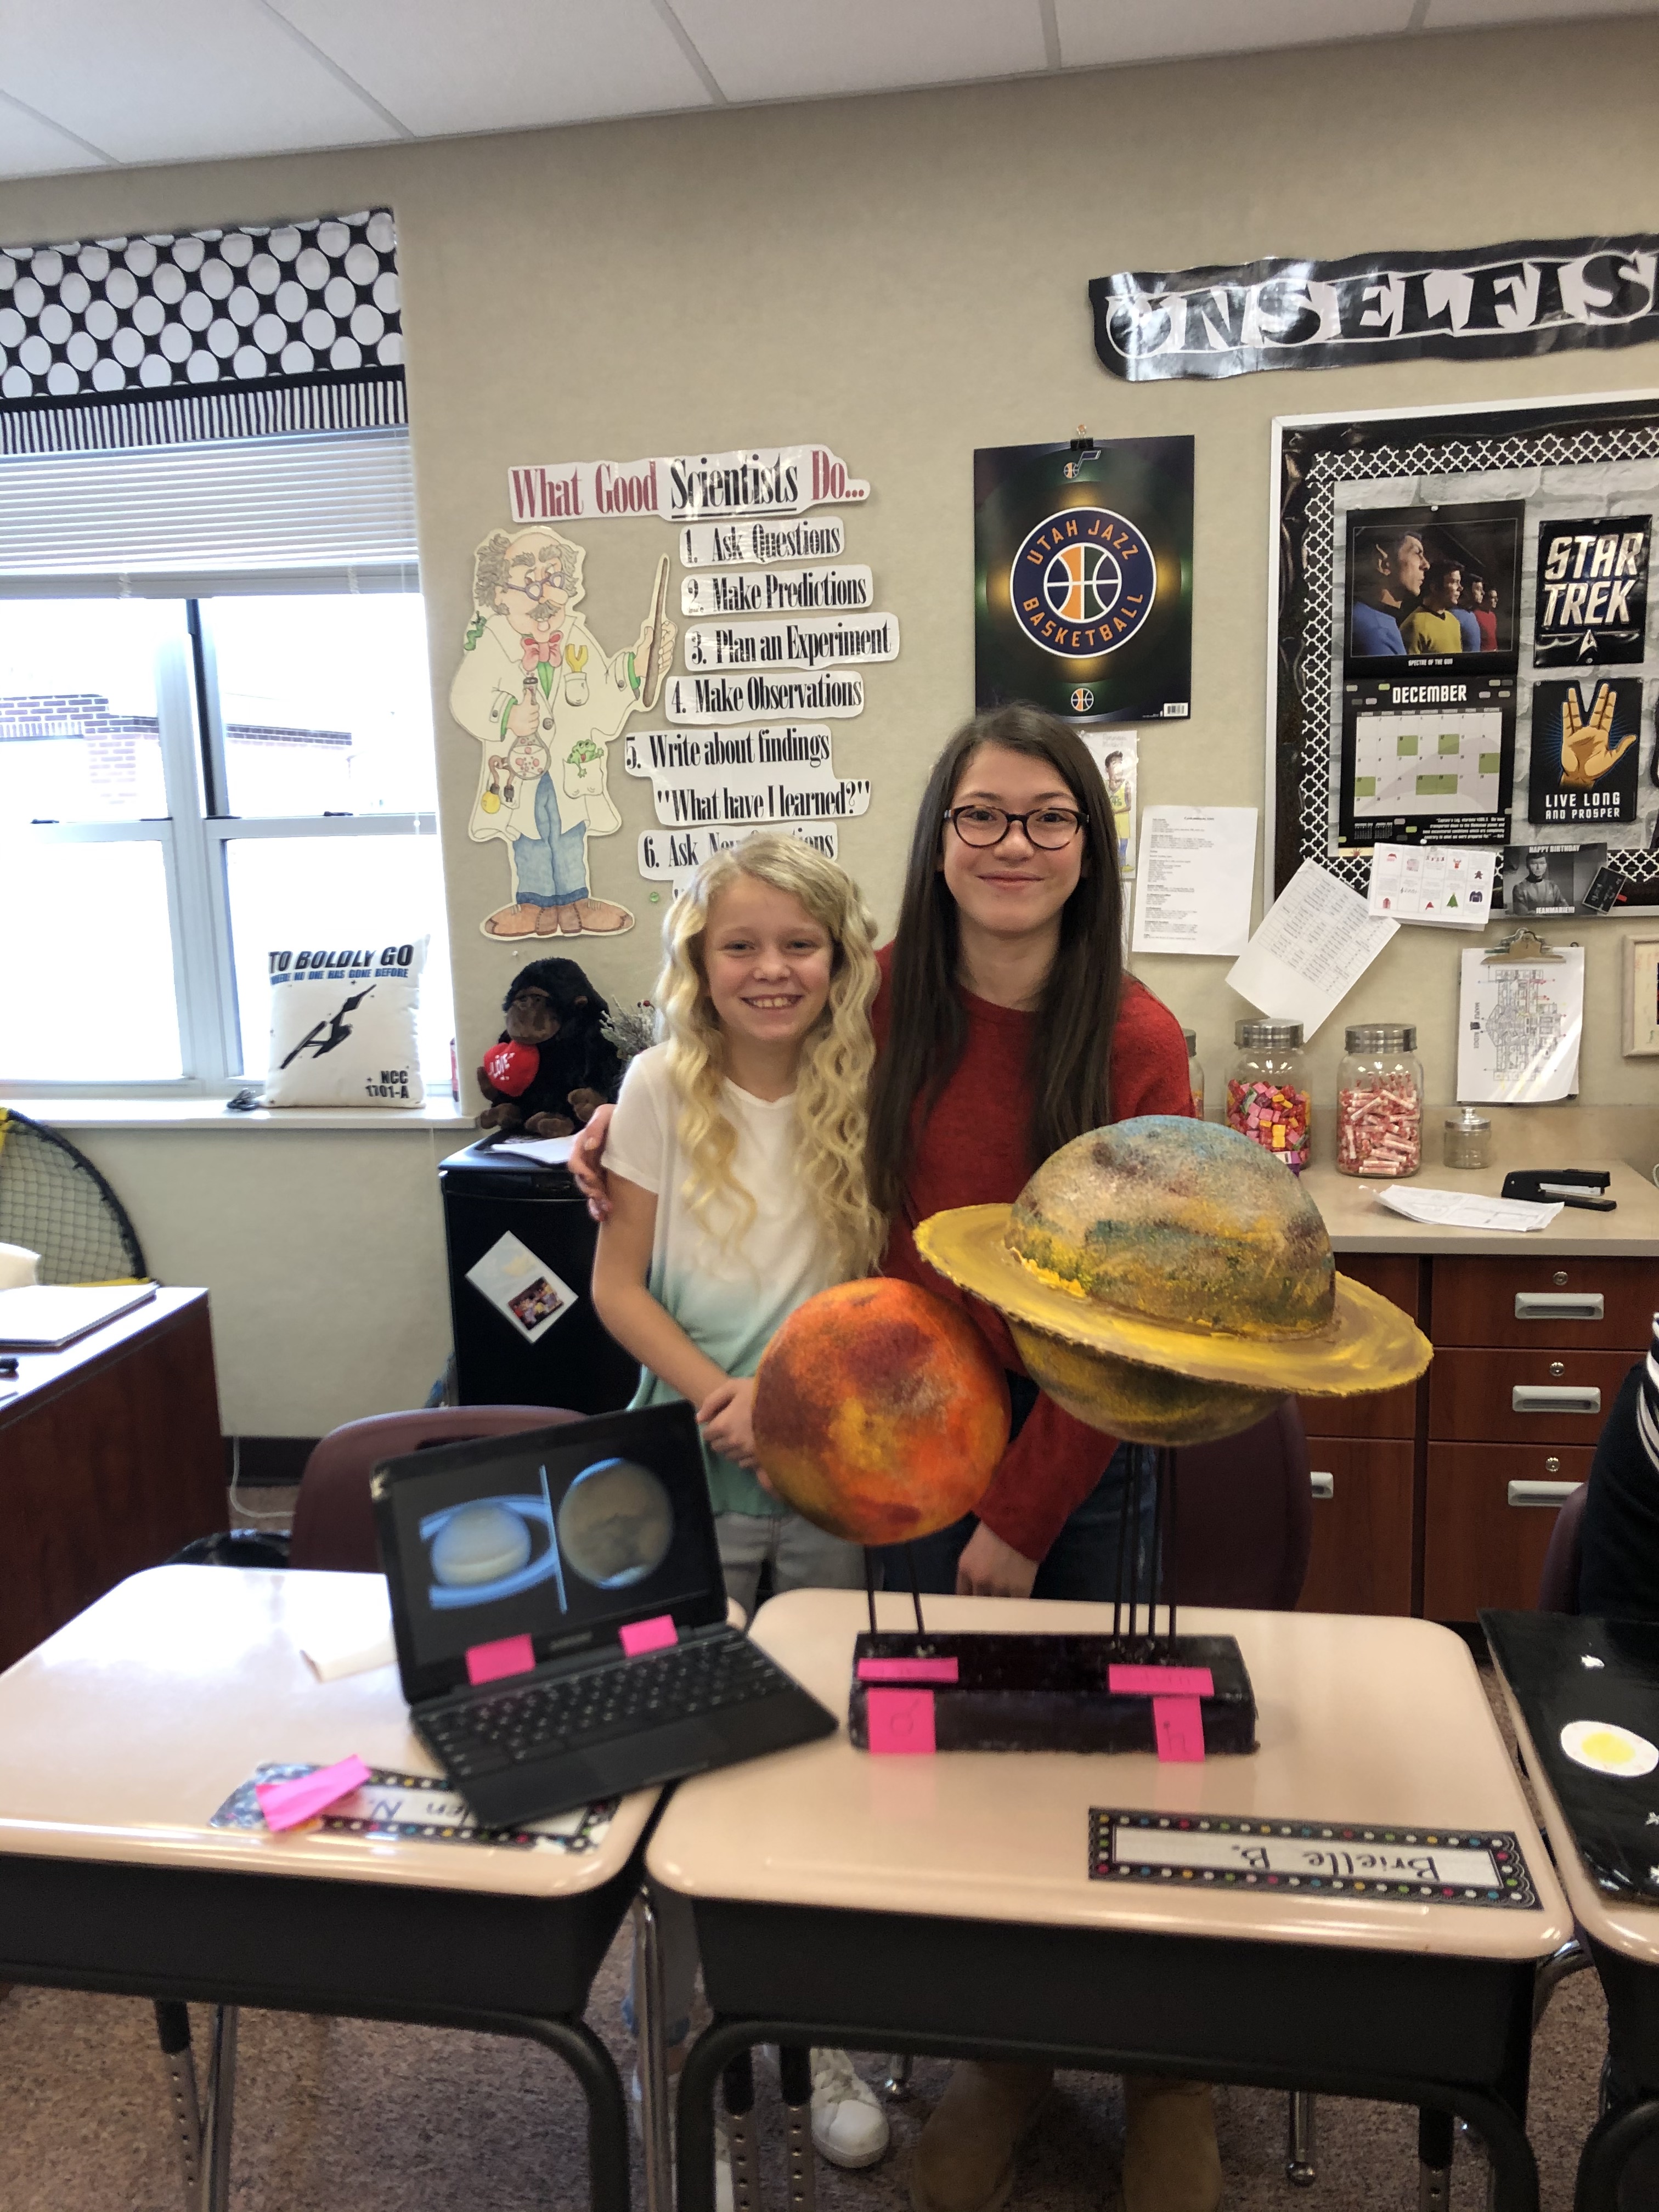 solar system projects high school